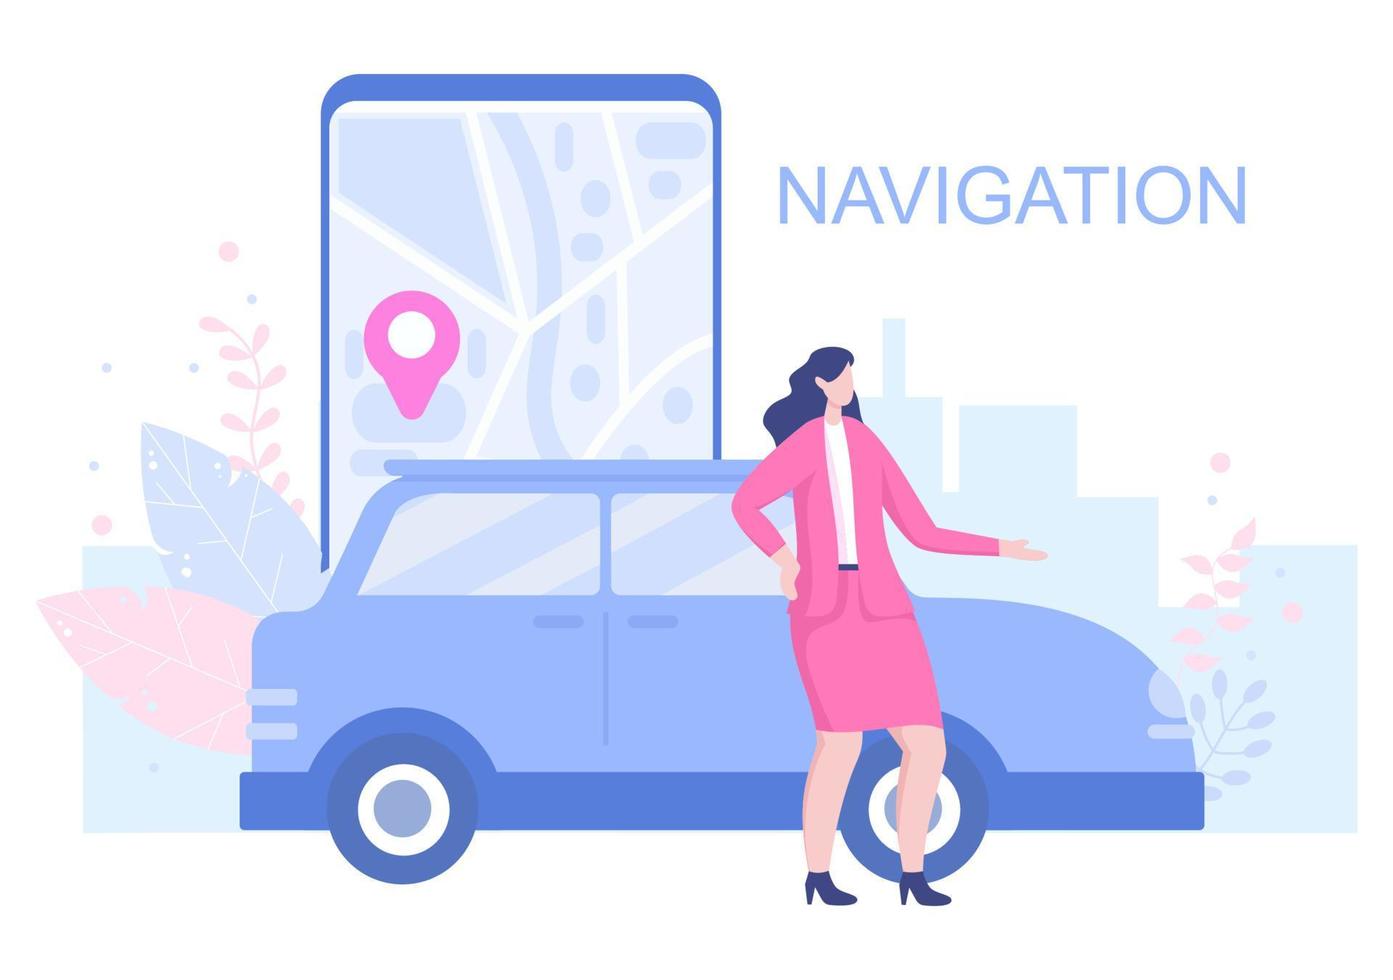 GPS Navigation Map and Compass on Location Search Application Shows the Position or Route you are Going. Background Vector Illustration